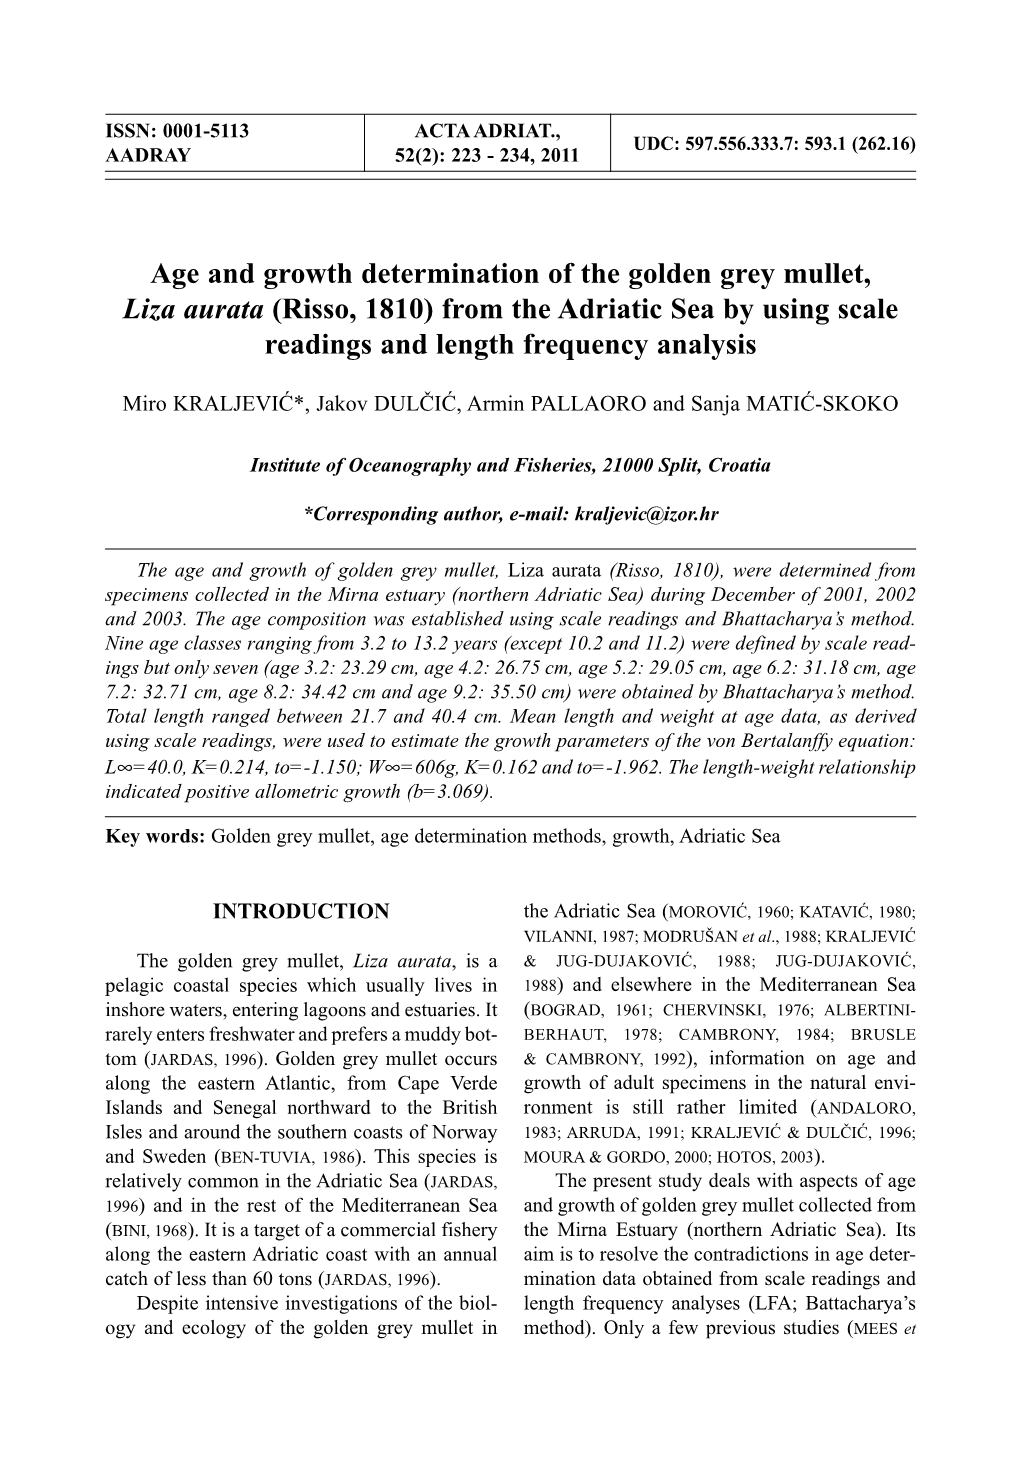 Age and Growth Determination of the Golden Grey Mullet, Liza Aurata (Risso, 1810) from the Adriatic Sea by Using Scale Readings and Length Frequency Analysis